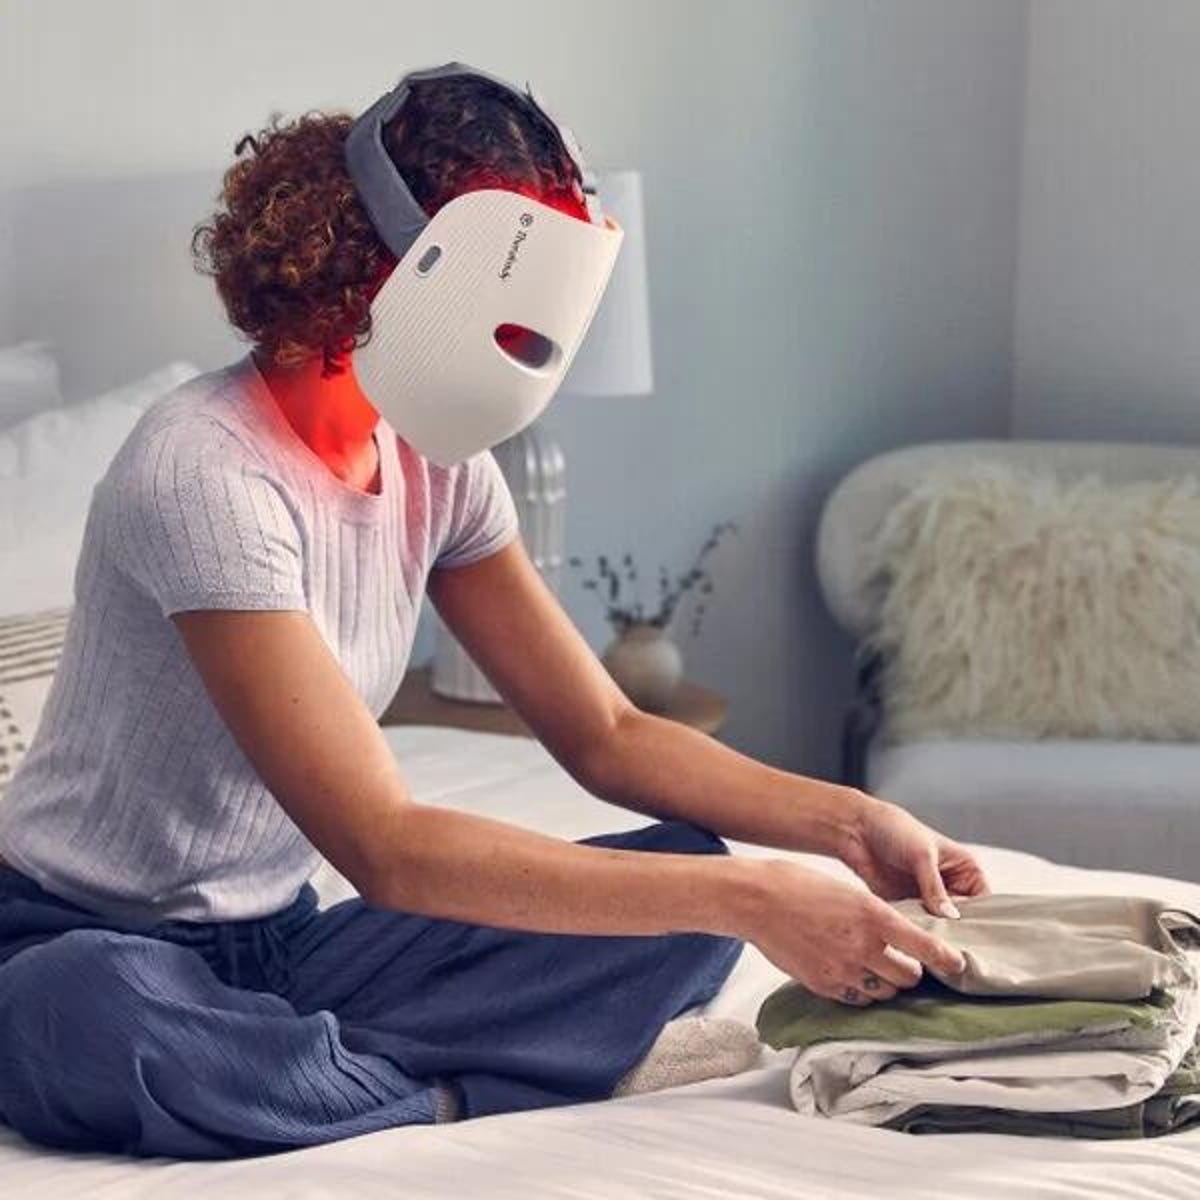 A woman folding clothes in her Therabody LED face mask